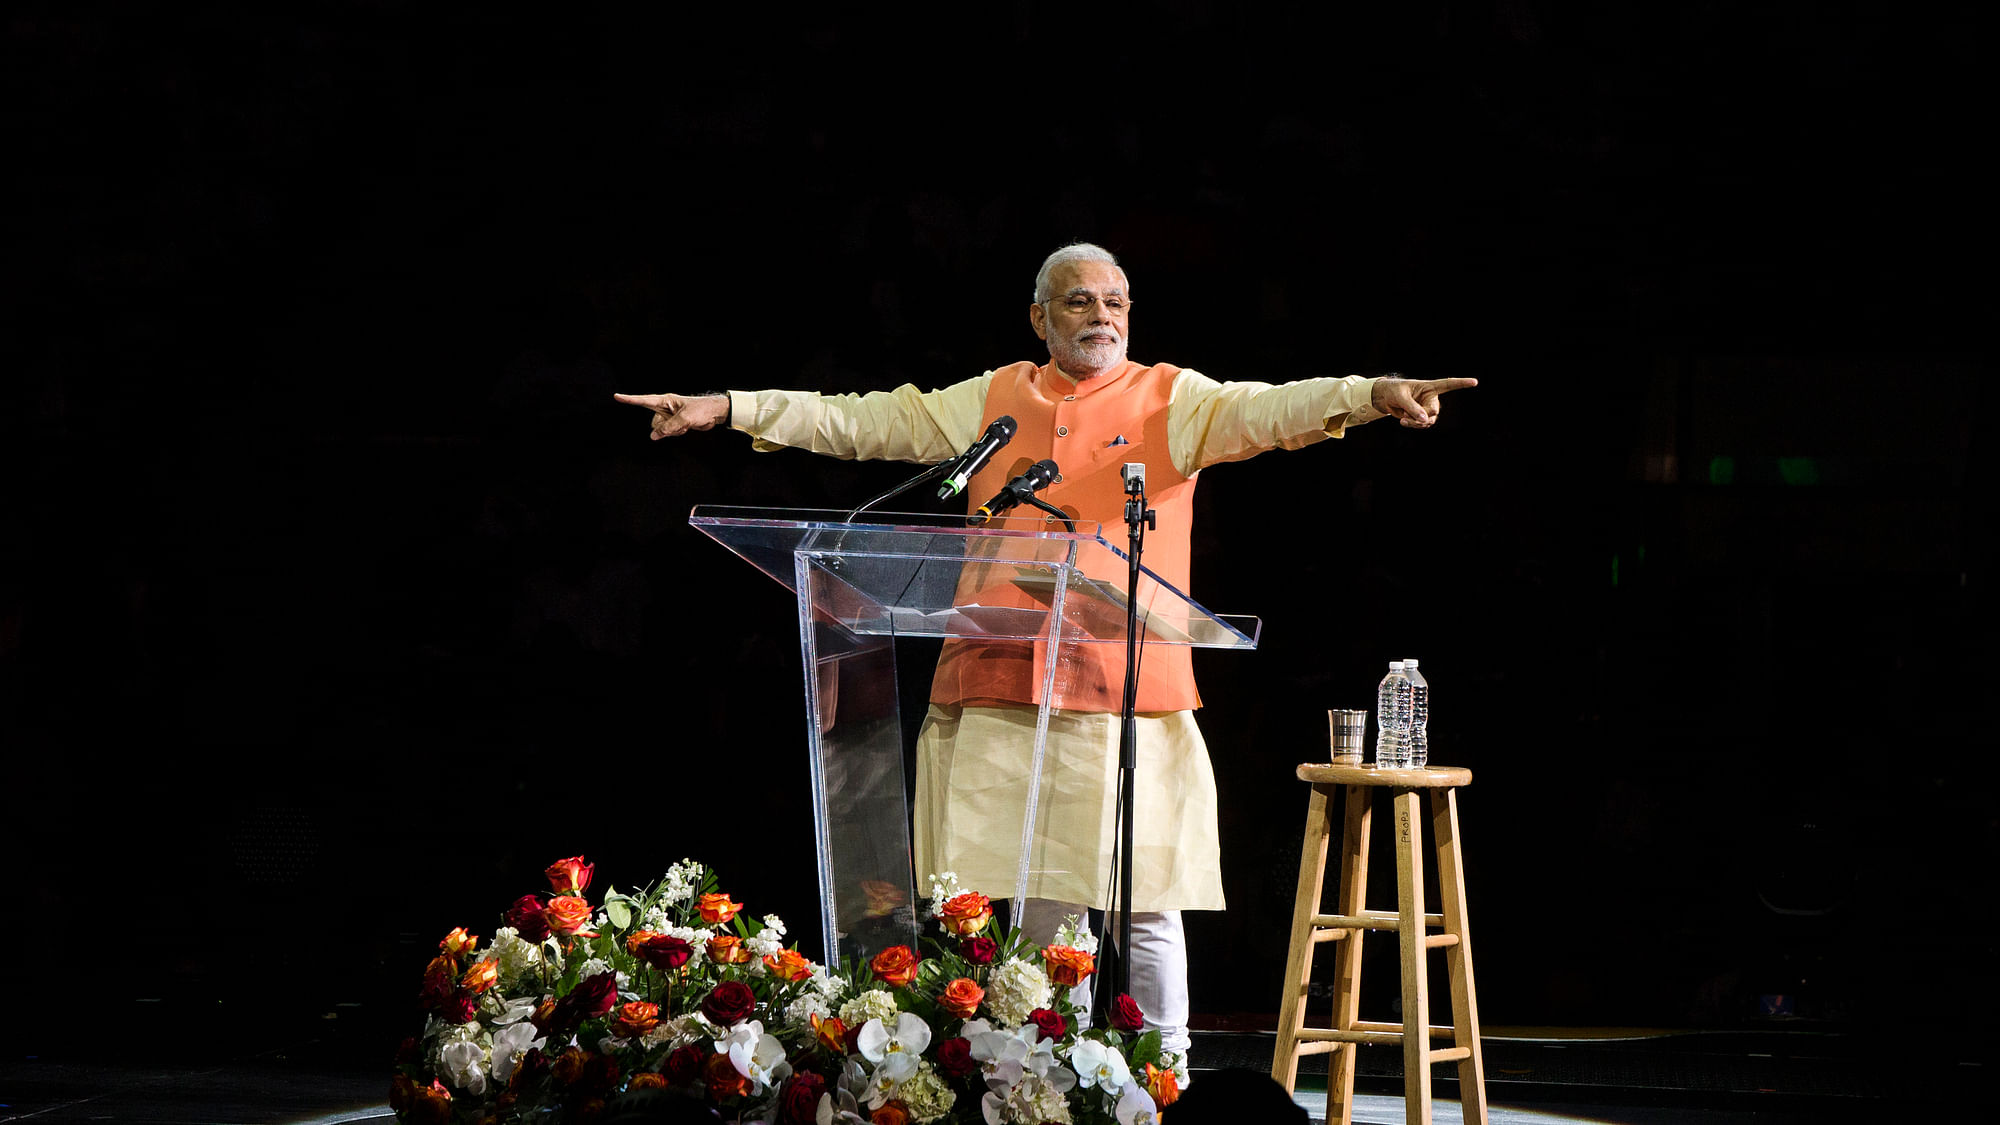 Prime Minister Narendra Modi gestures while speaking at Madison Square Garden in New York, during a visit to the United States, September 28, 2014. (Photo: Reuters)